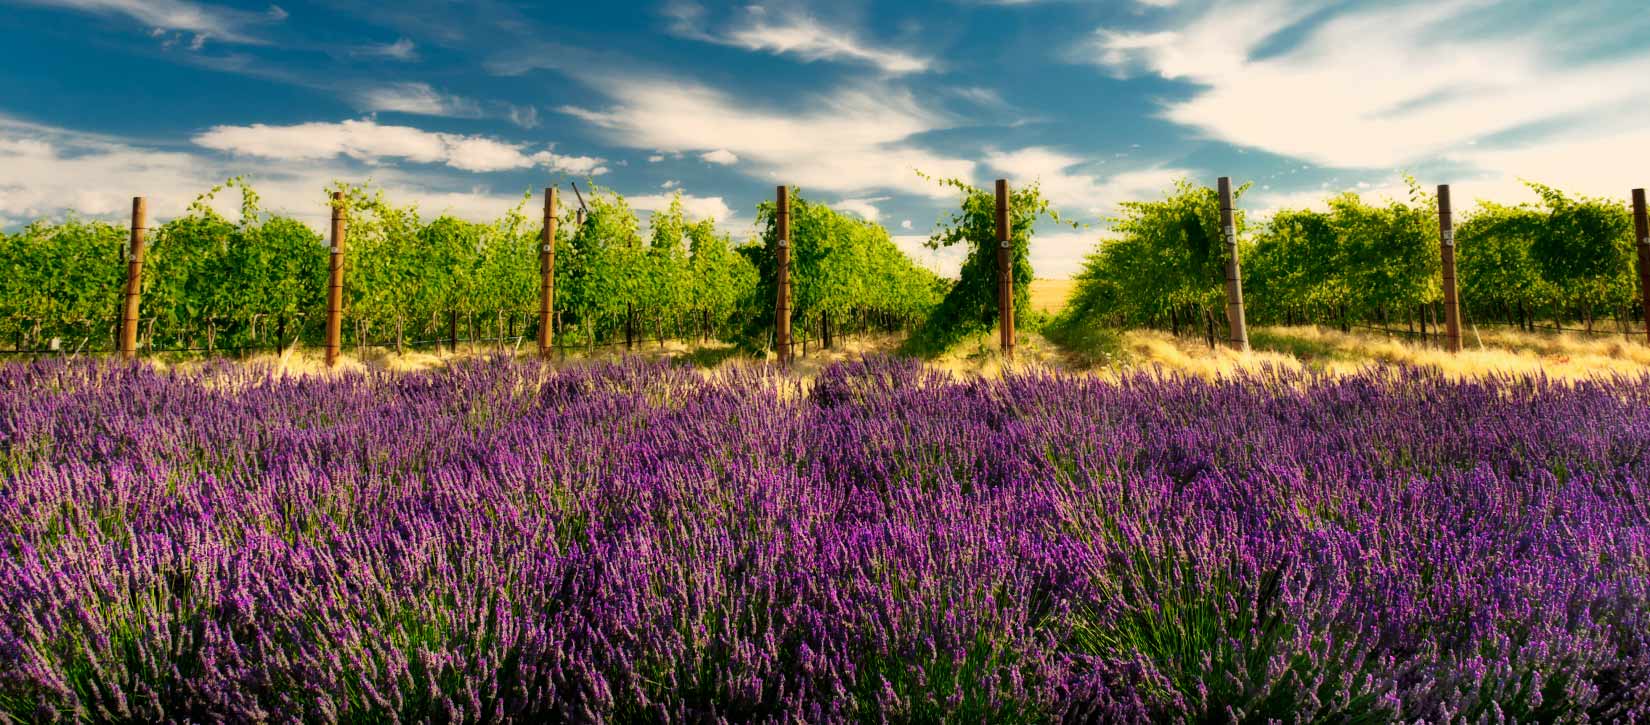 Lush lavender bushes growing in front of a vineyard with blue sky Walla Walla Washington Wine Country The FINCH hotel